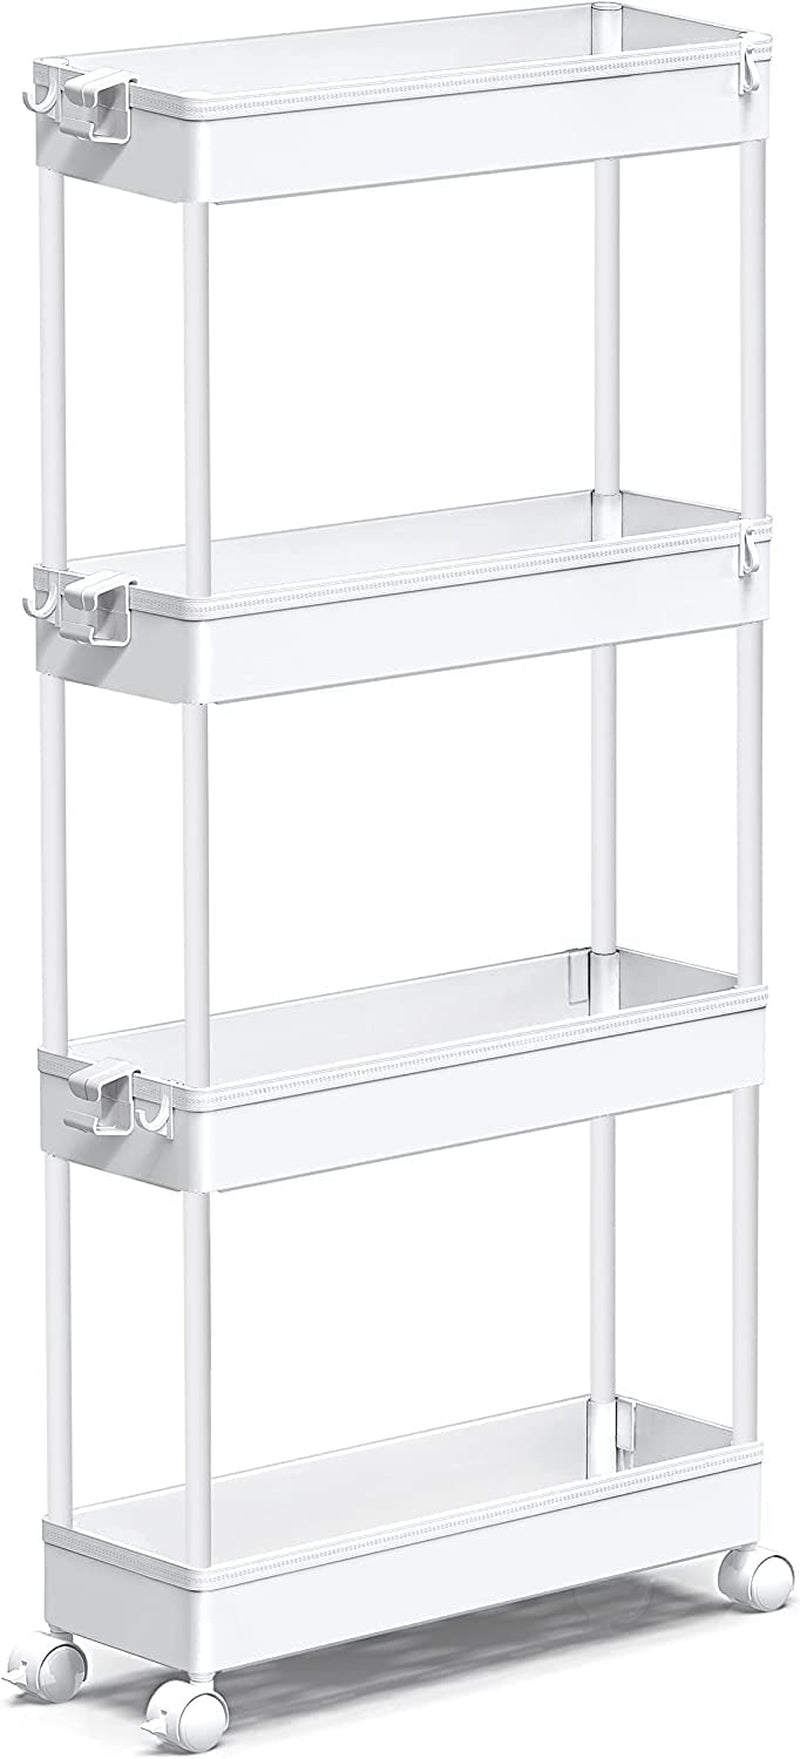 SPACEKEEPER Slim Rolling Storage Cart 4 Tier Bathroom Organizer Mobile Shelving Unit Storage Rolling Utility Cart Tower Rack for Kitchen Bathroom Laundry Narrow Places, White Home & Garden > Household Supplies > Storage & Organization SPACEKEEPER White  